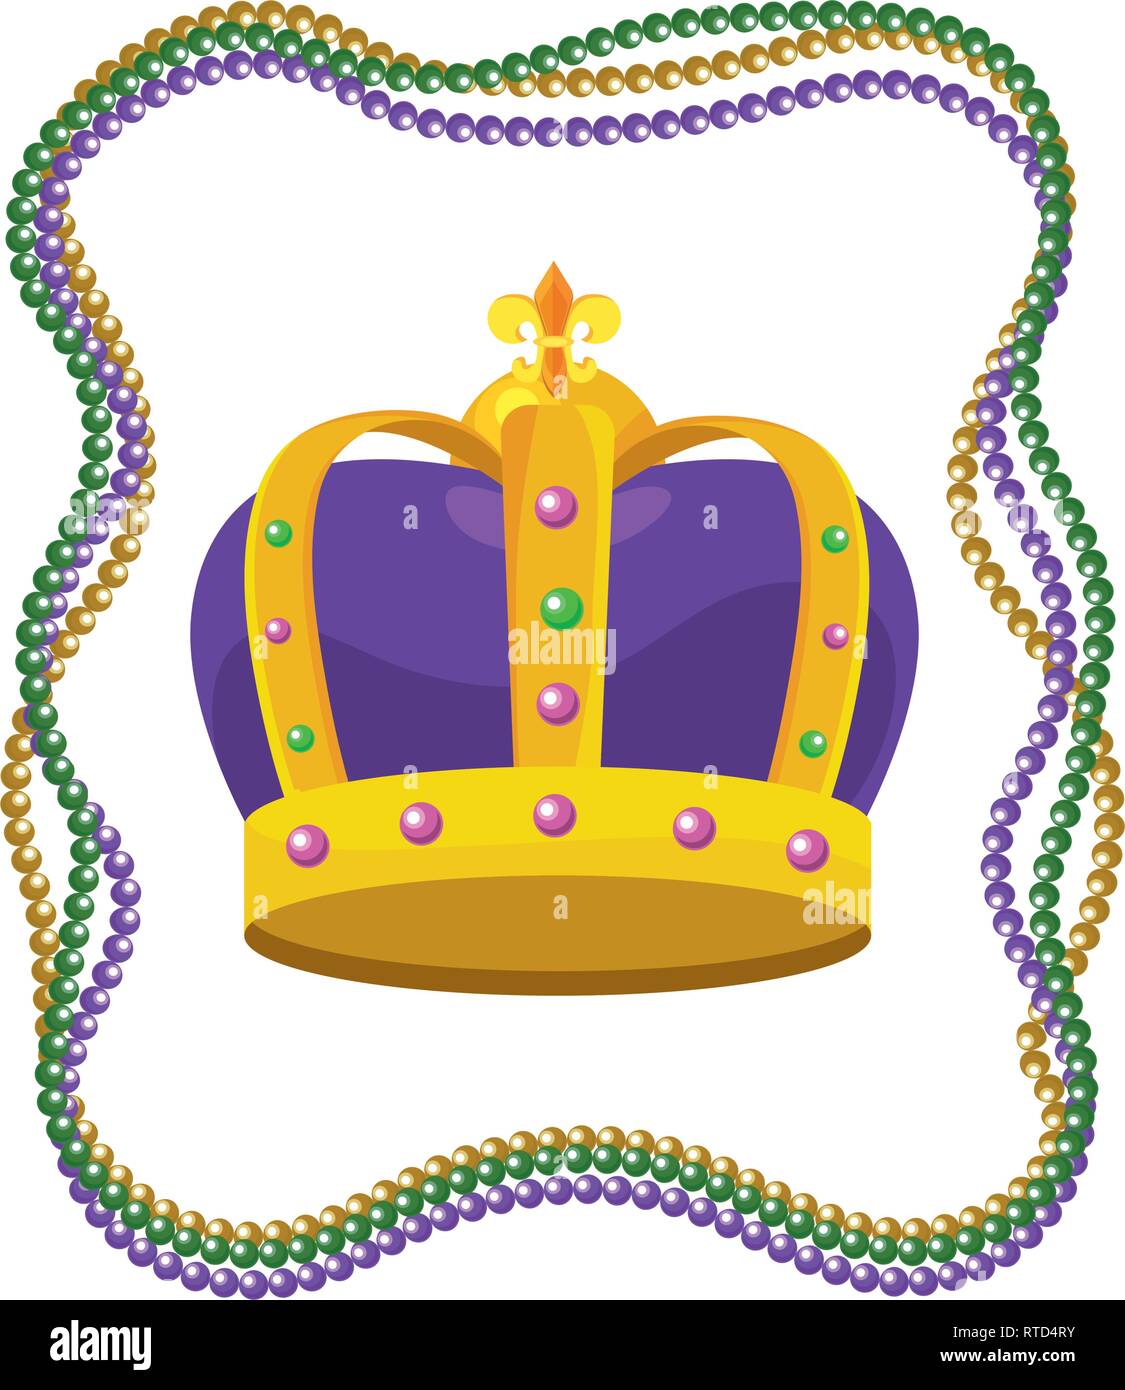 bejeweled crown with beads Stock Vector